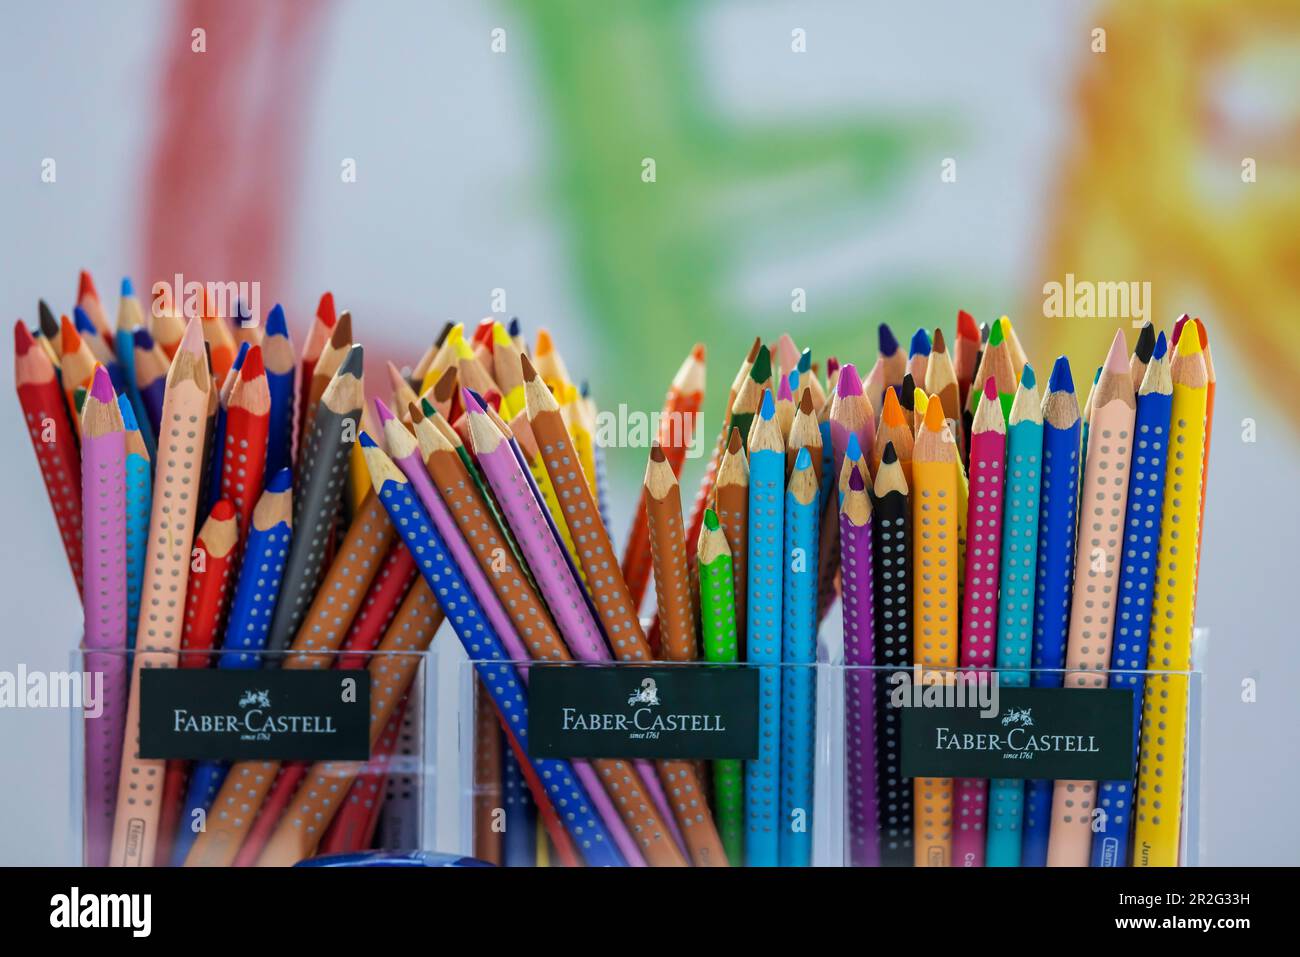 Stack of Faber-Castell Pastel Pencils Stock Photo - Alamy